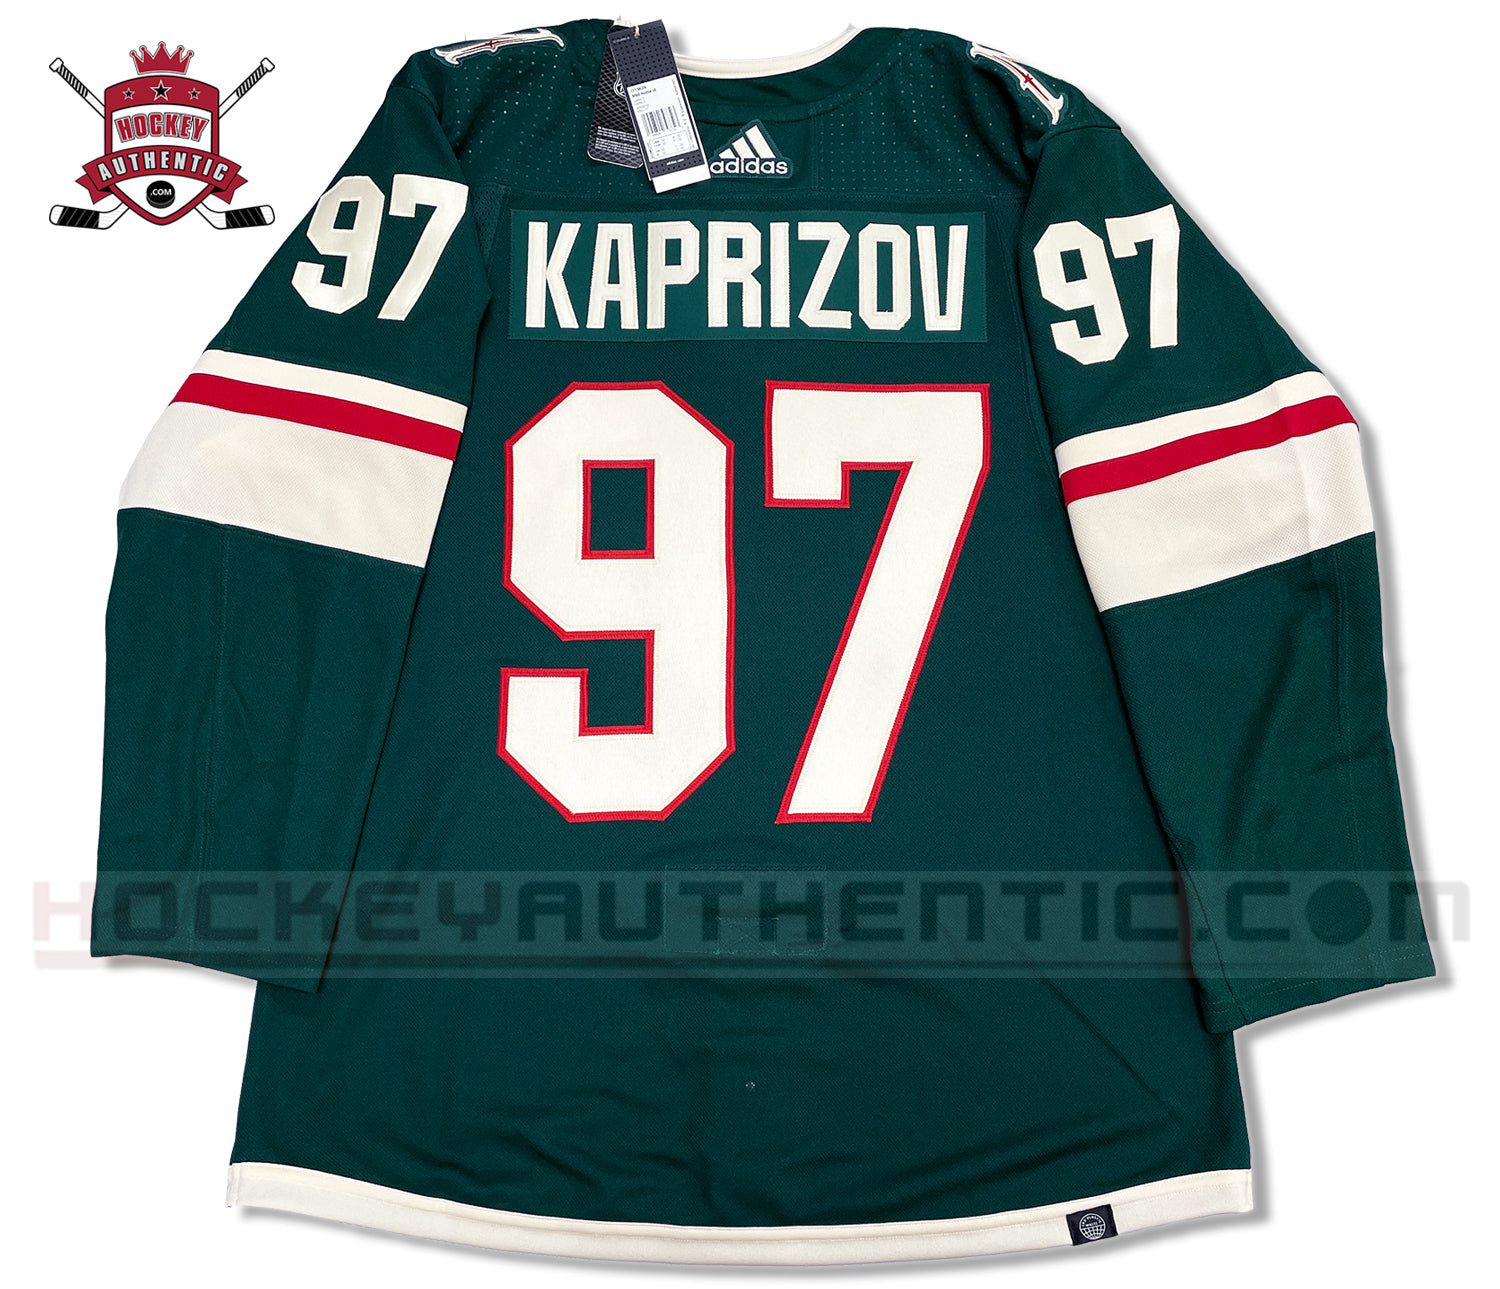 Kaprizov's Jersey One of the Top-Selling in NHL (Guess Who's #1?)